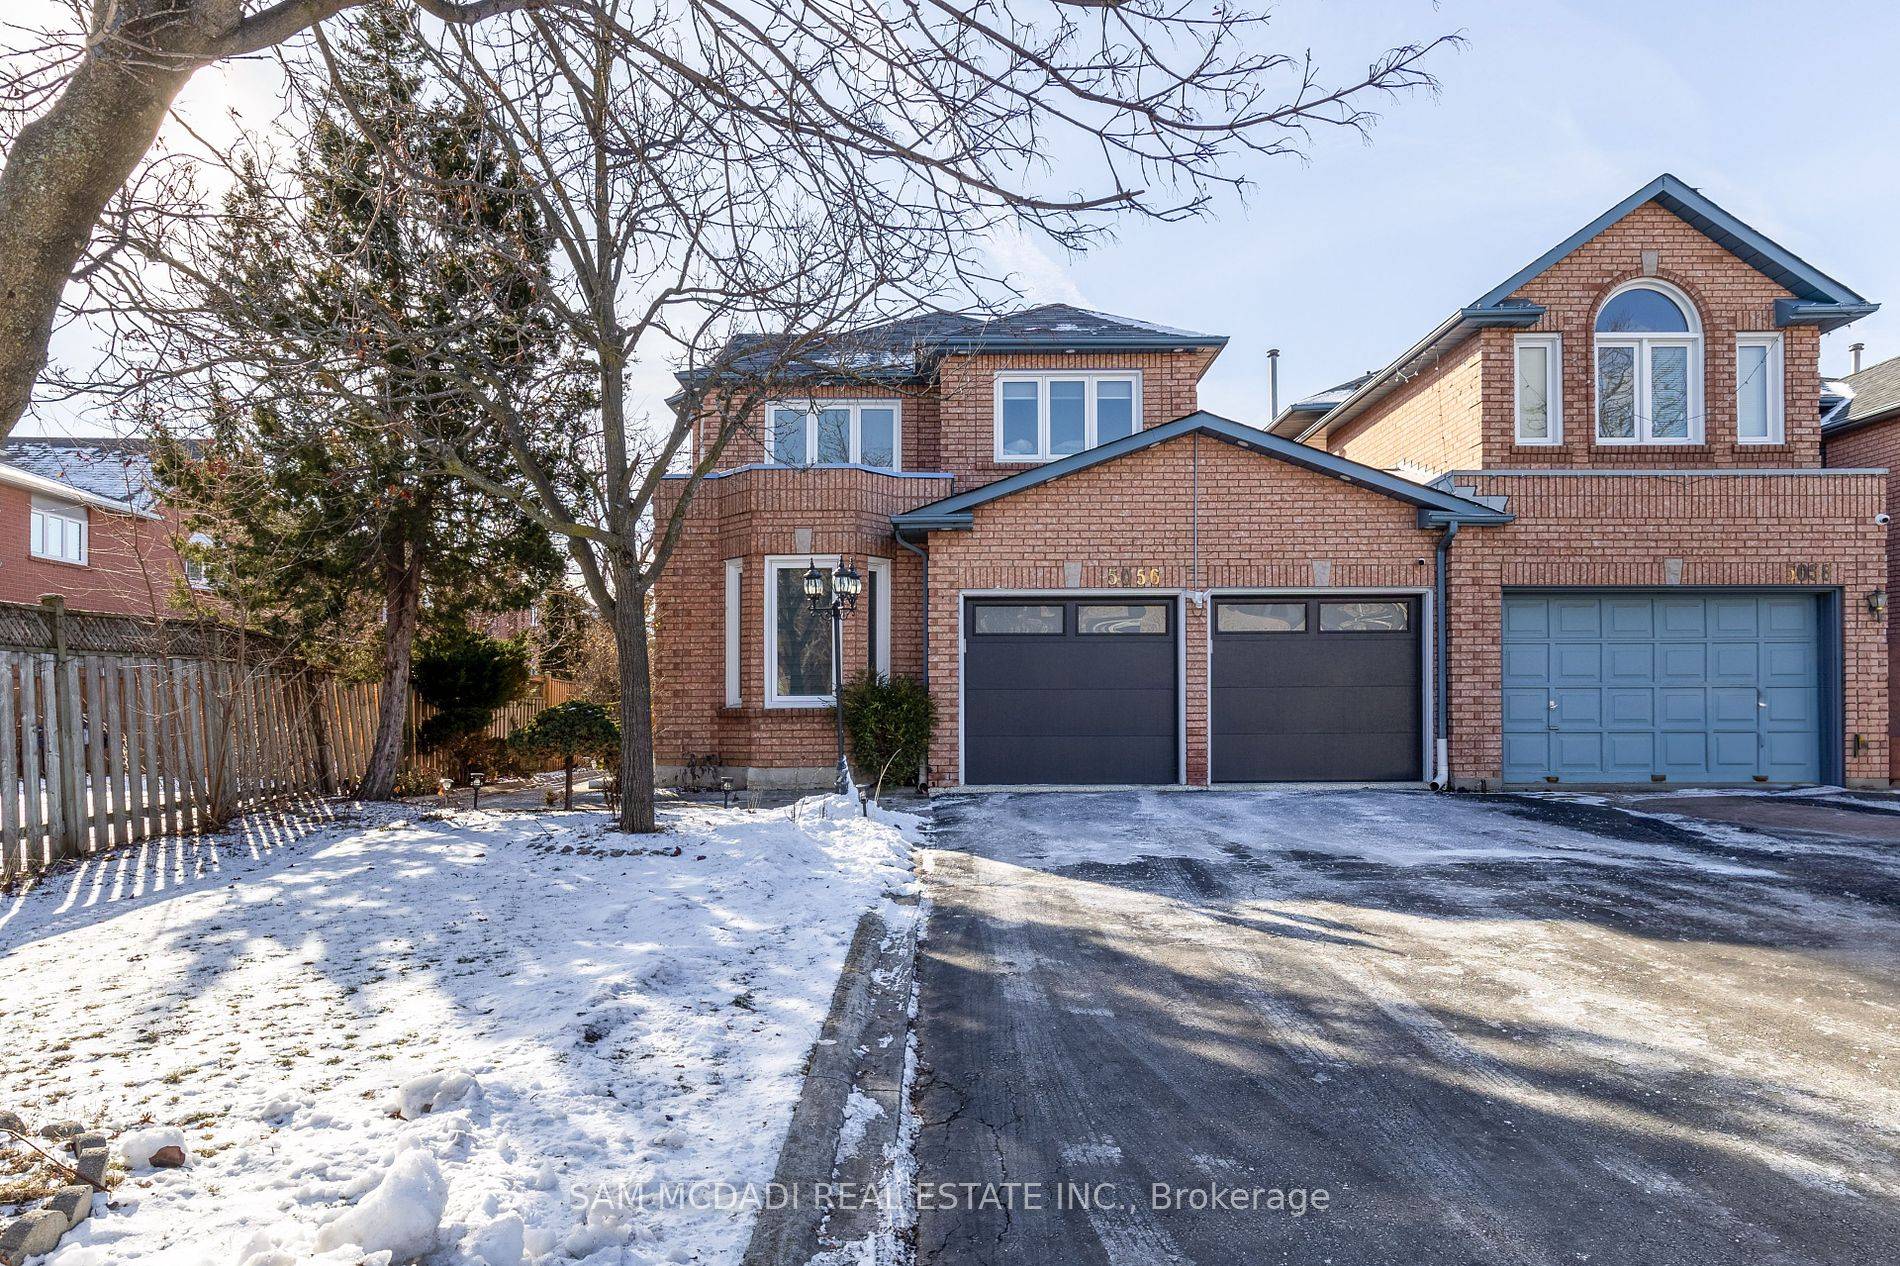 Beautiful Home in high demand area, many recent updates, the size of this home is equivalent to a detached, all separate rooms, stainless steel appliances, breakfast area, walkout to back ...